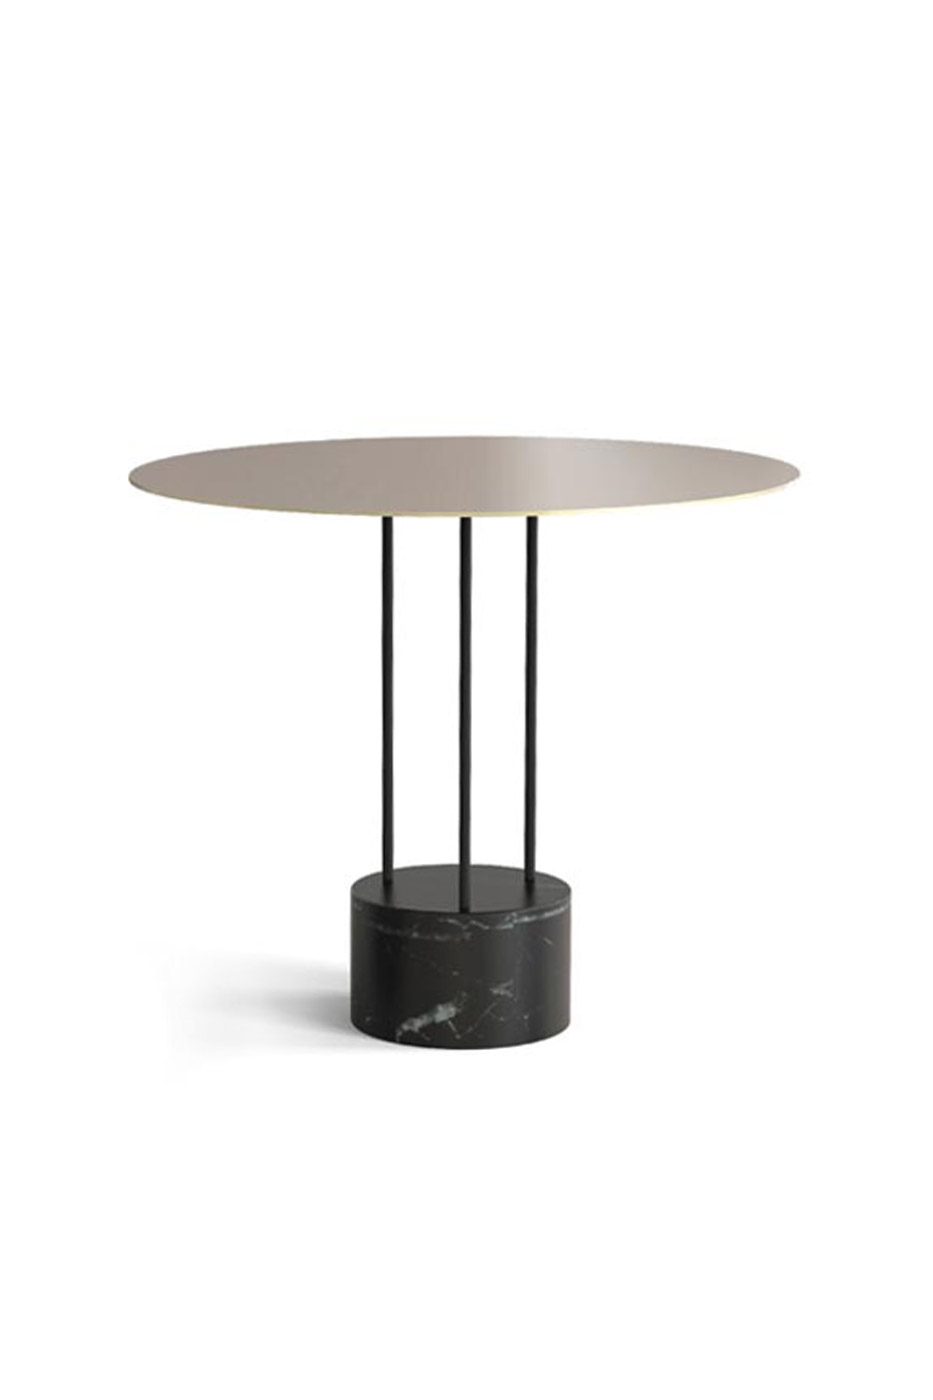 Perle champagne table